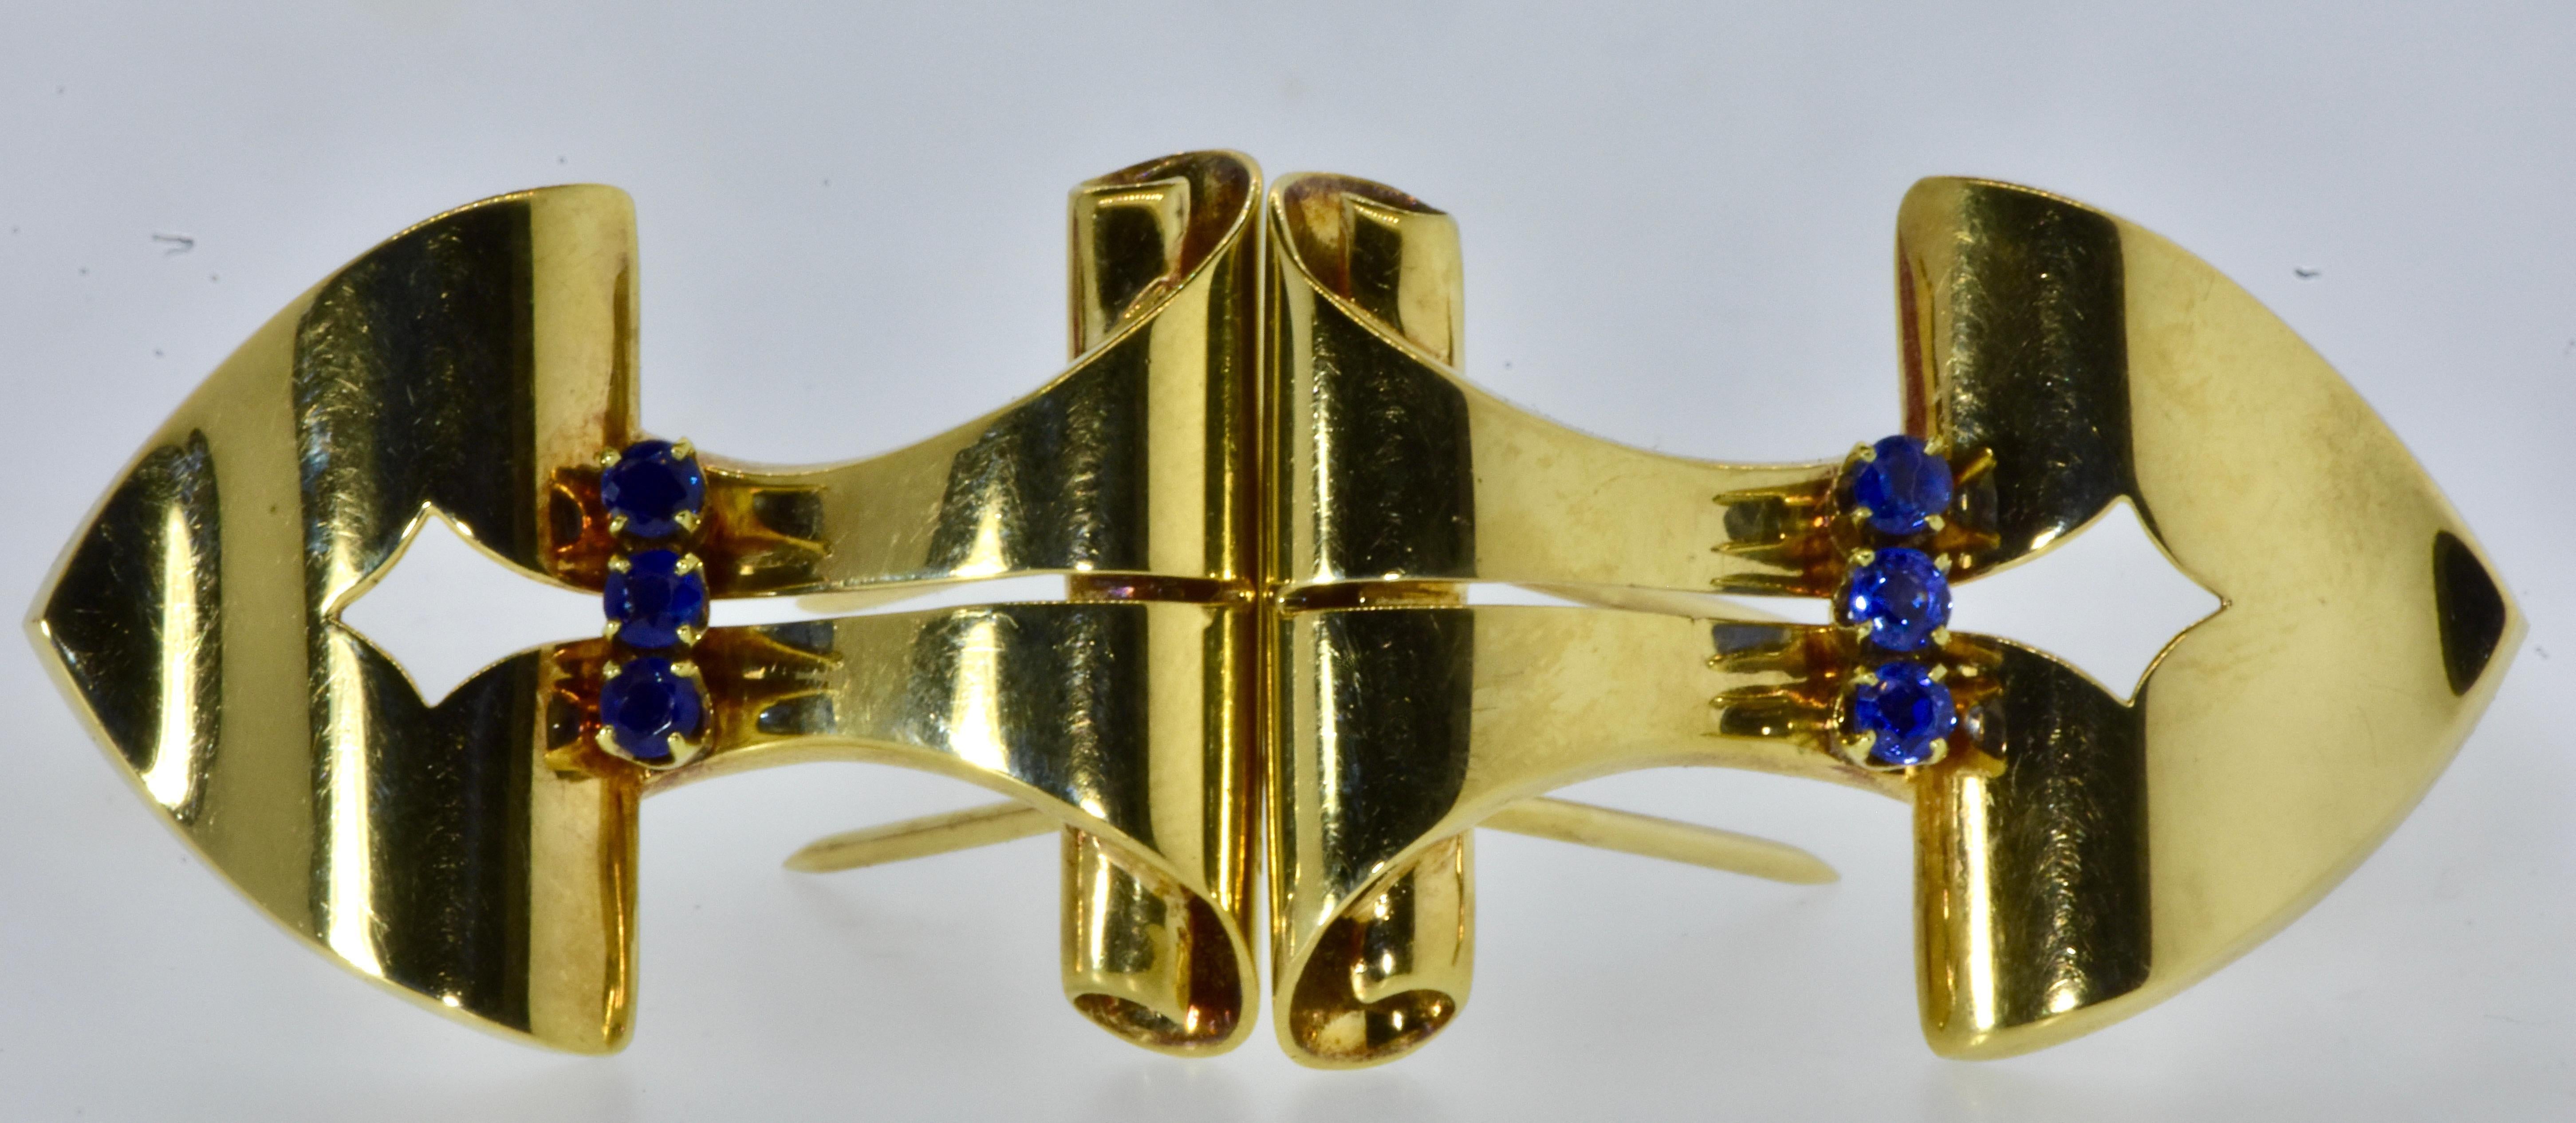 Cartier Sapphire and Yellow Gold Double Clips, c. 1935 For Sale 3